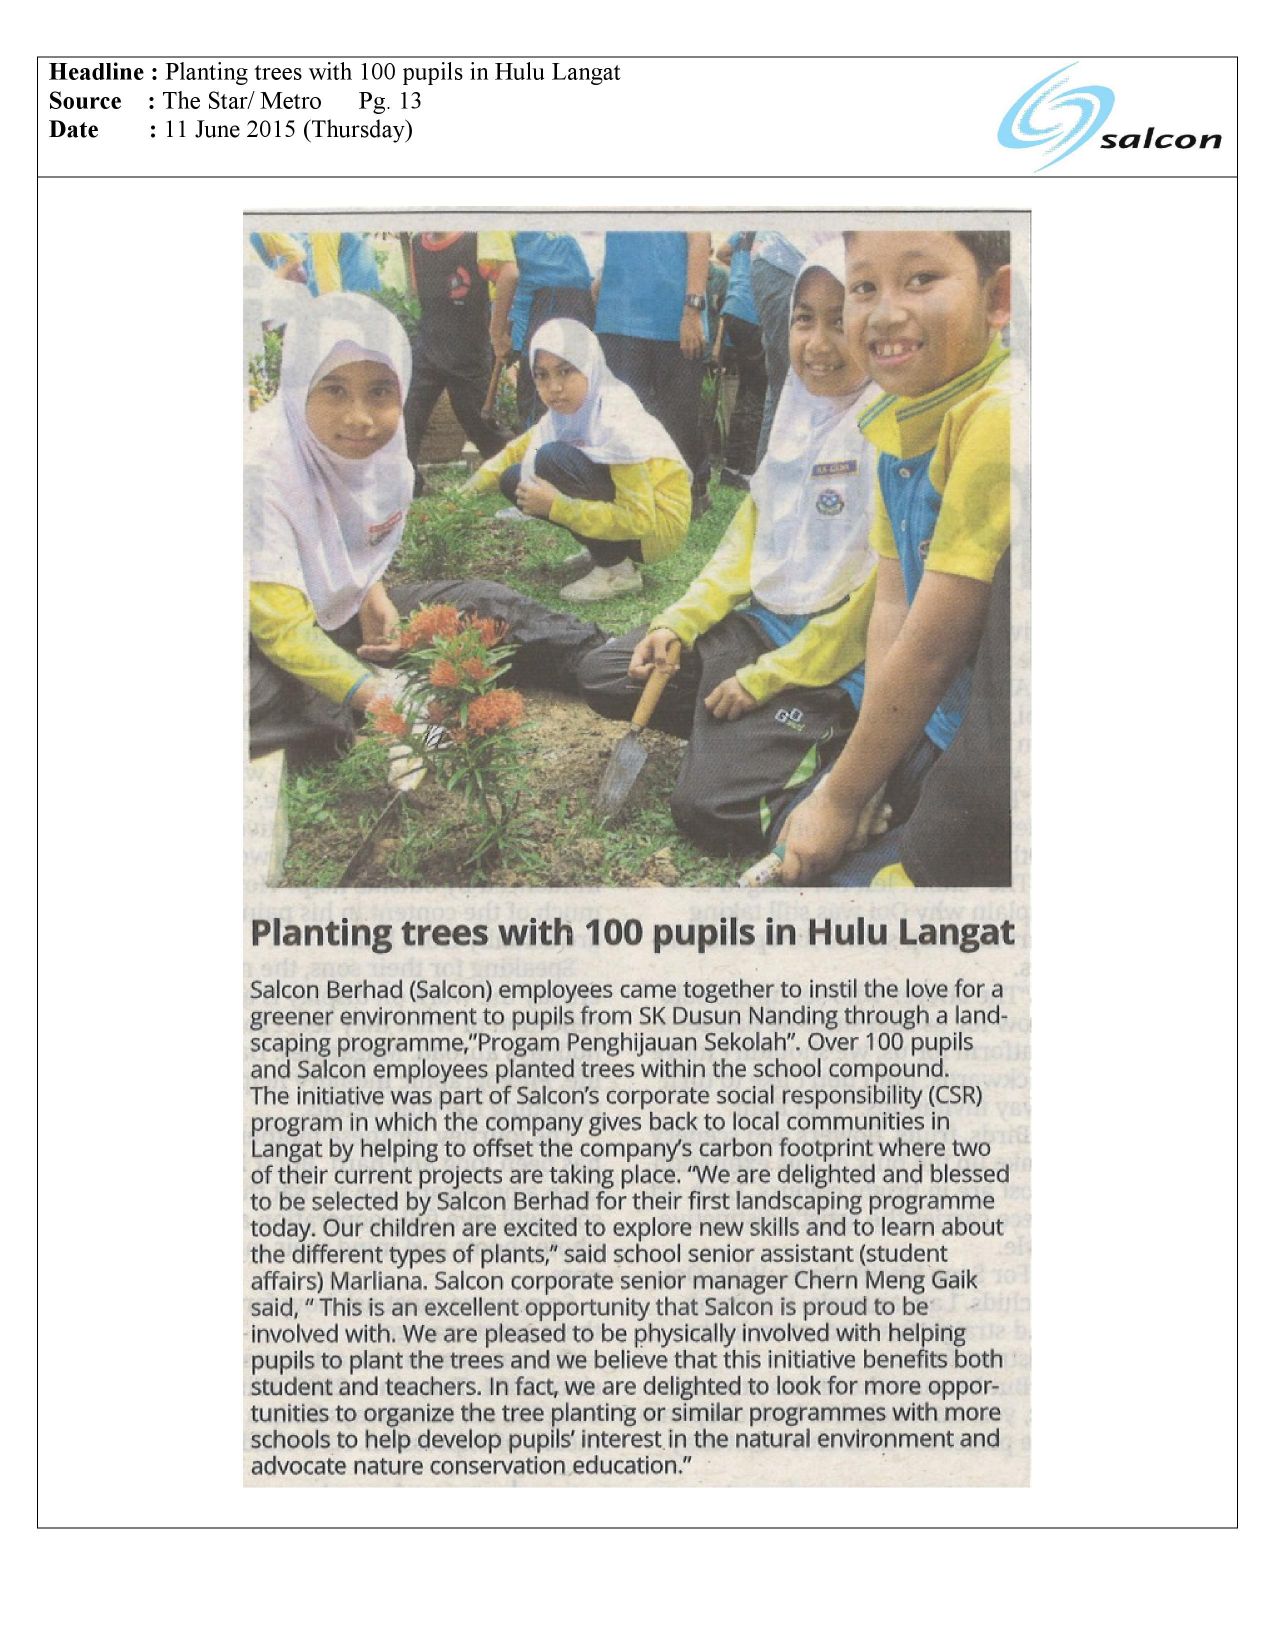 Planting trees with 100 pupils in Hulu Langat